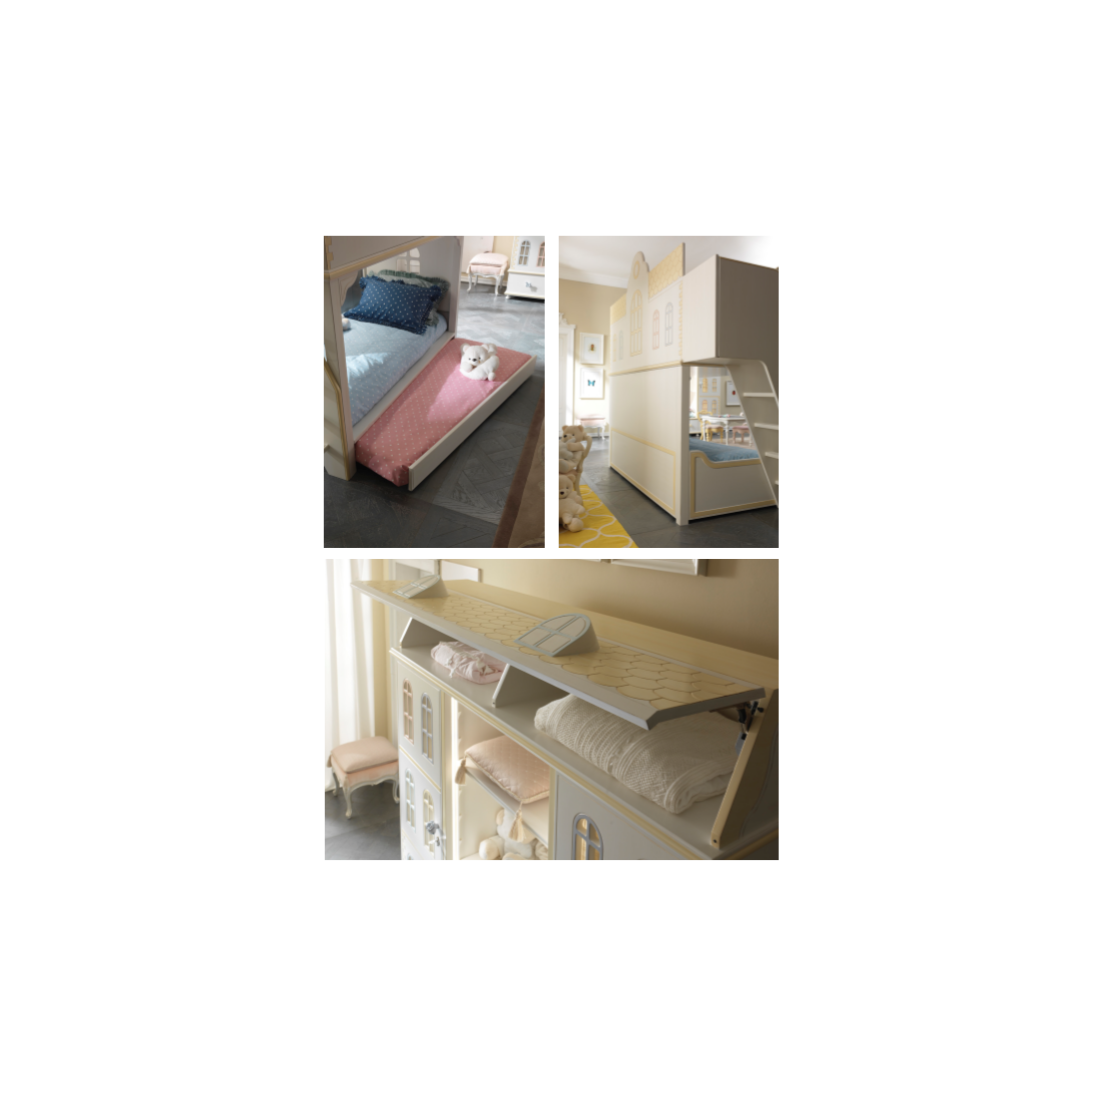 Dollhouse Bunk Bed By Savio Firmino | Unique baby gifts